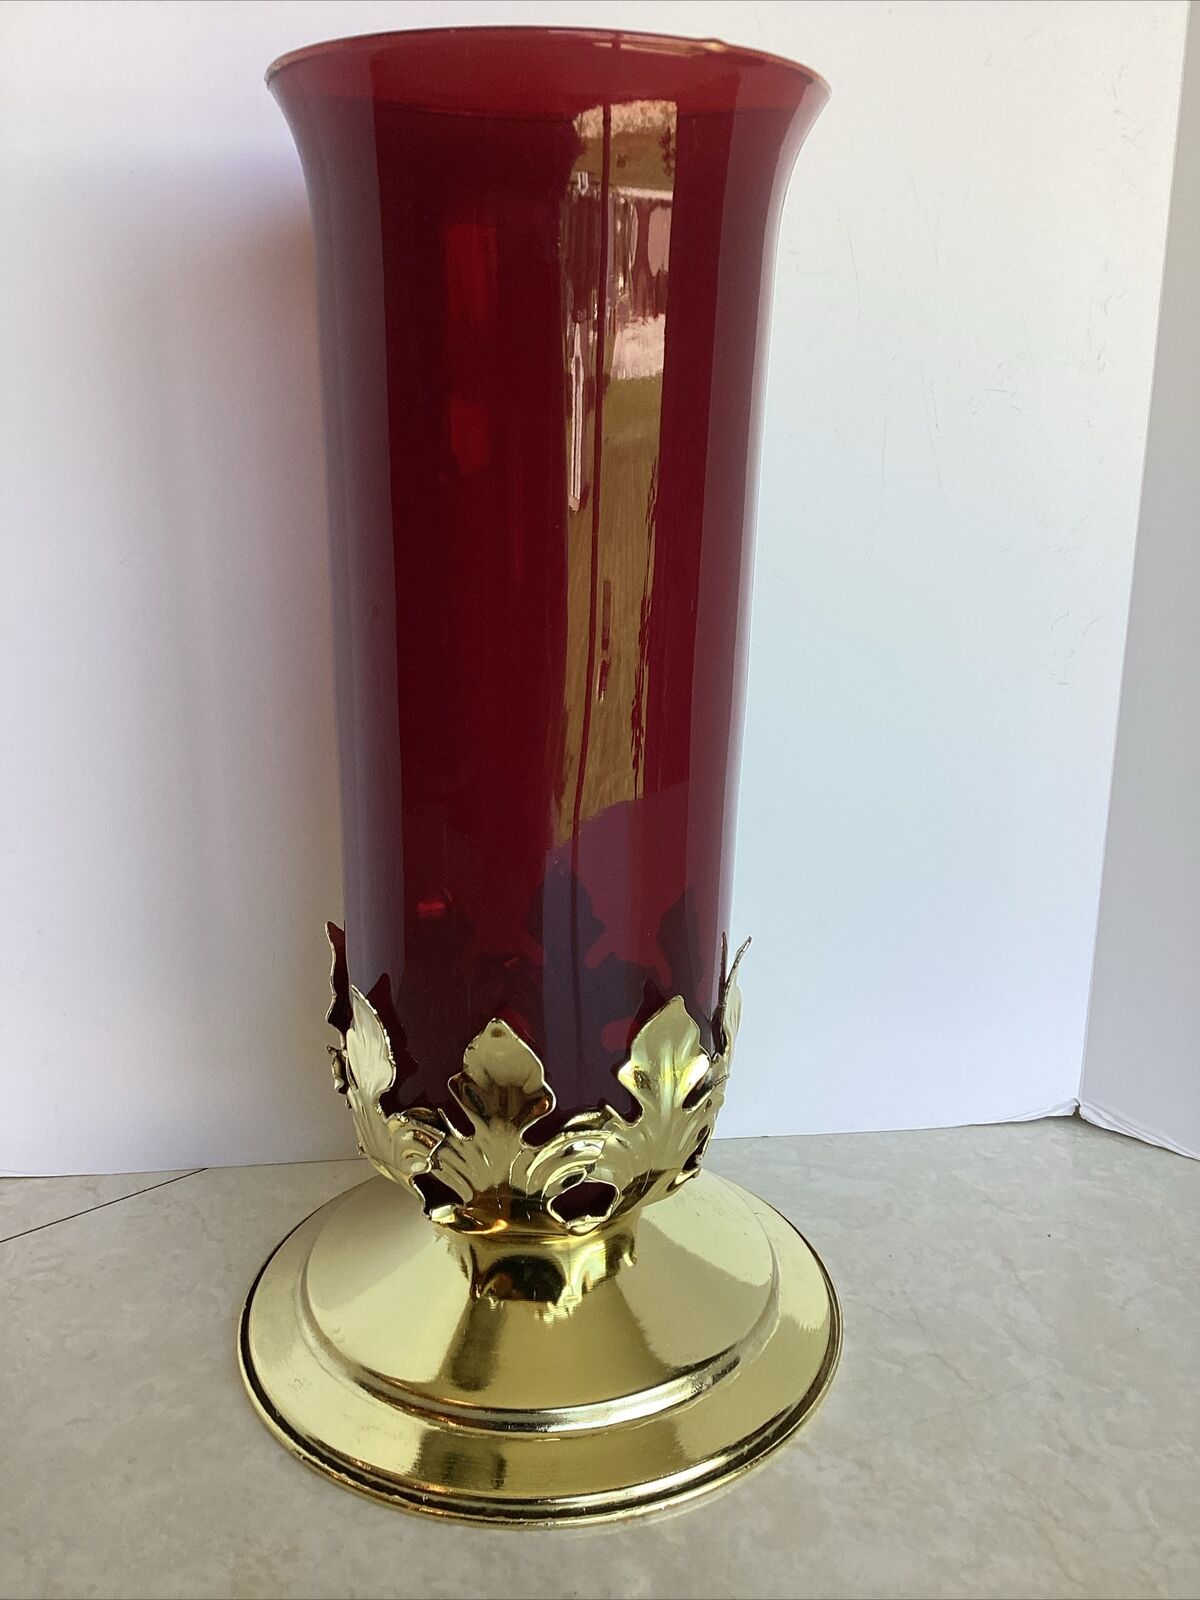 Vintage Catholic Church Altar Candle Holder Sanctuary Lamp Ruby Red Glass